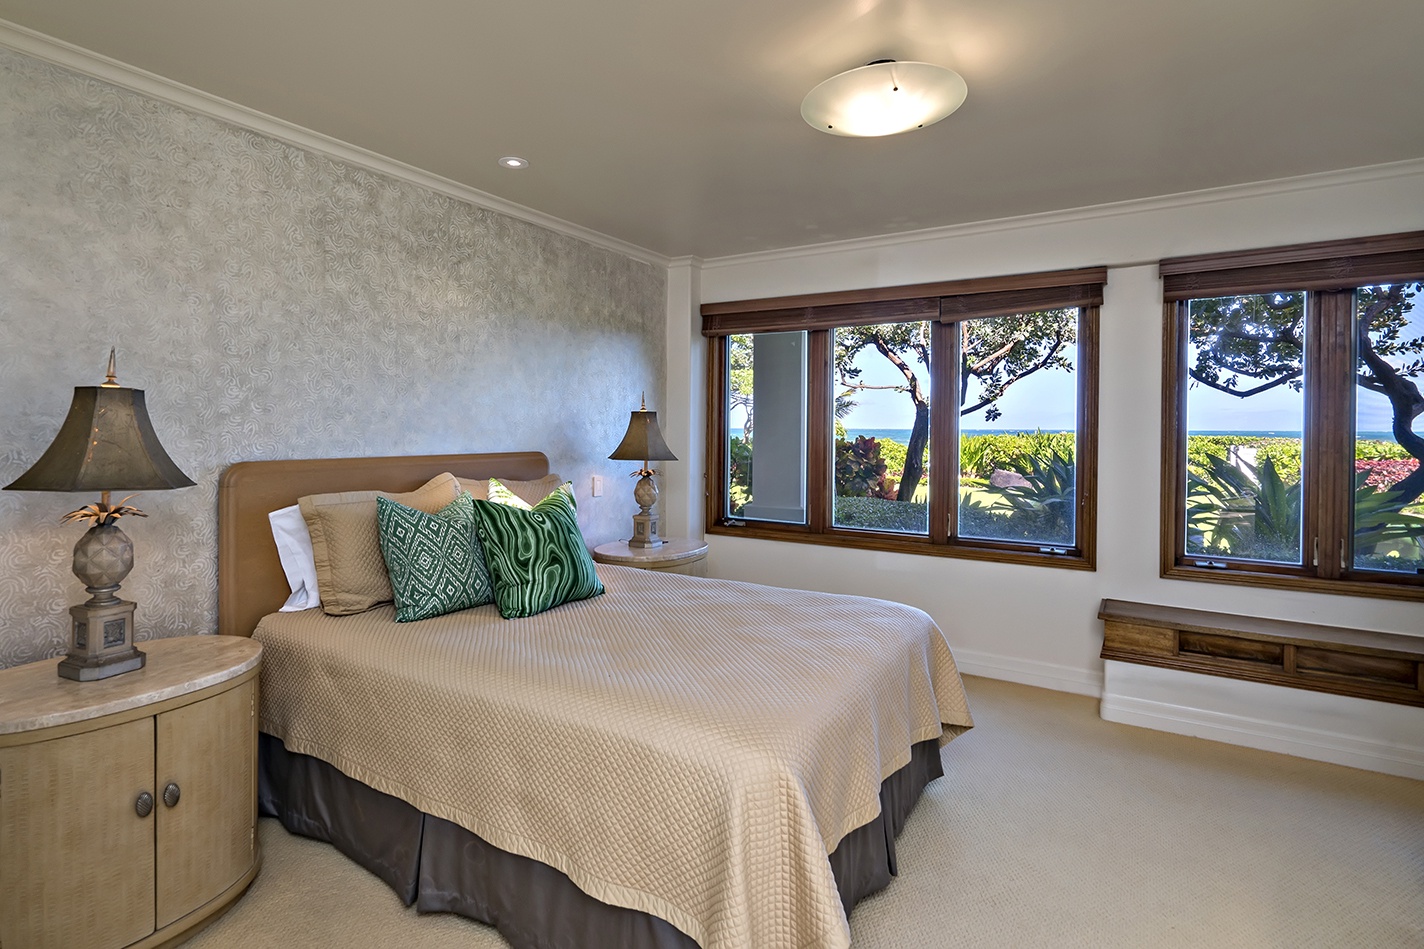 Kailua Vacation Rentals, Kailua's Kai Moena Estate - Main house: Guest Bedroom 1 located on the first floor with a split A/C unit and Queen Bed.